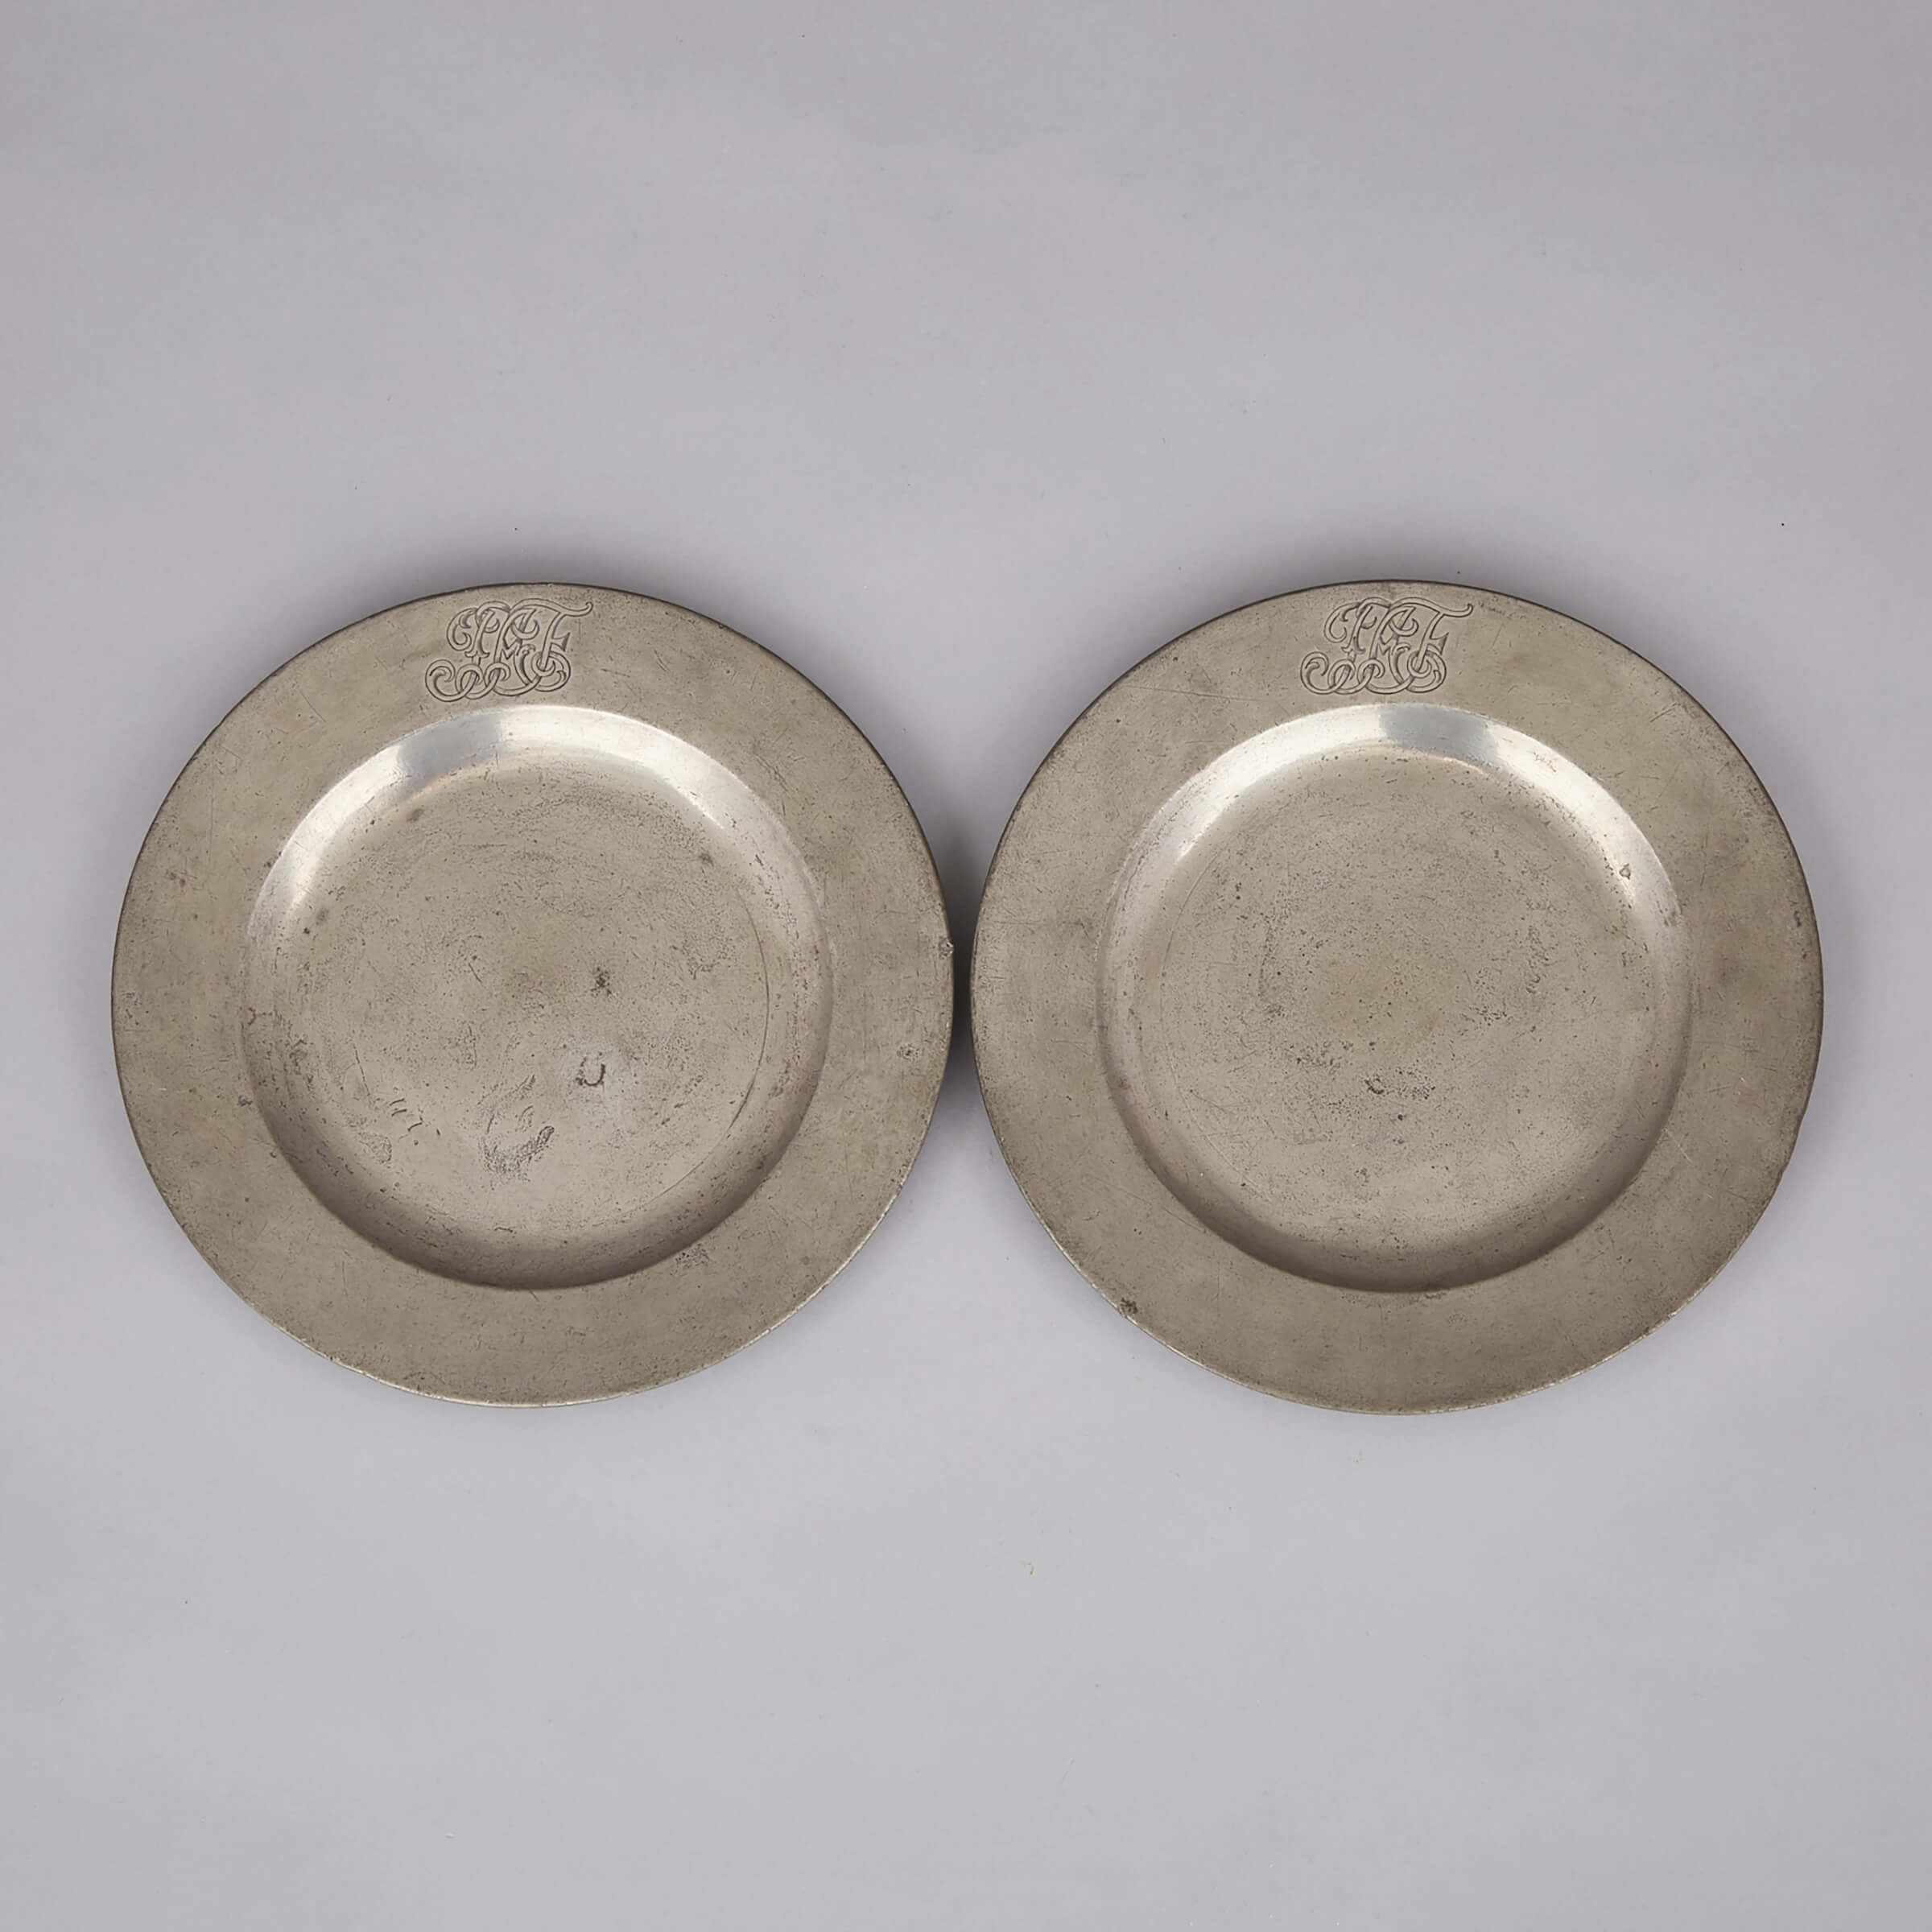 Pair of English Pewter Plates, Pitt and Floyd, London, c.1770